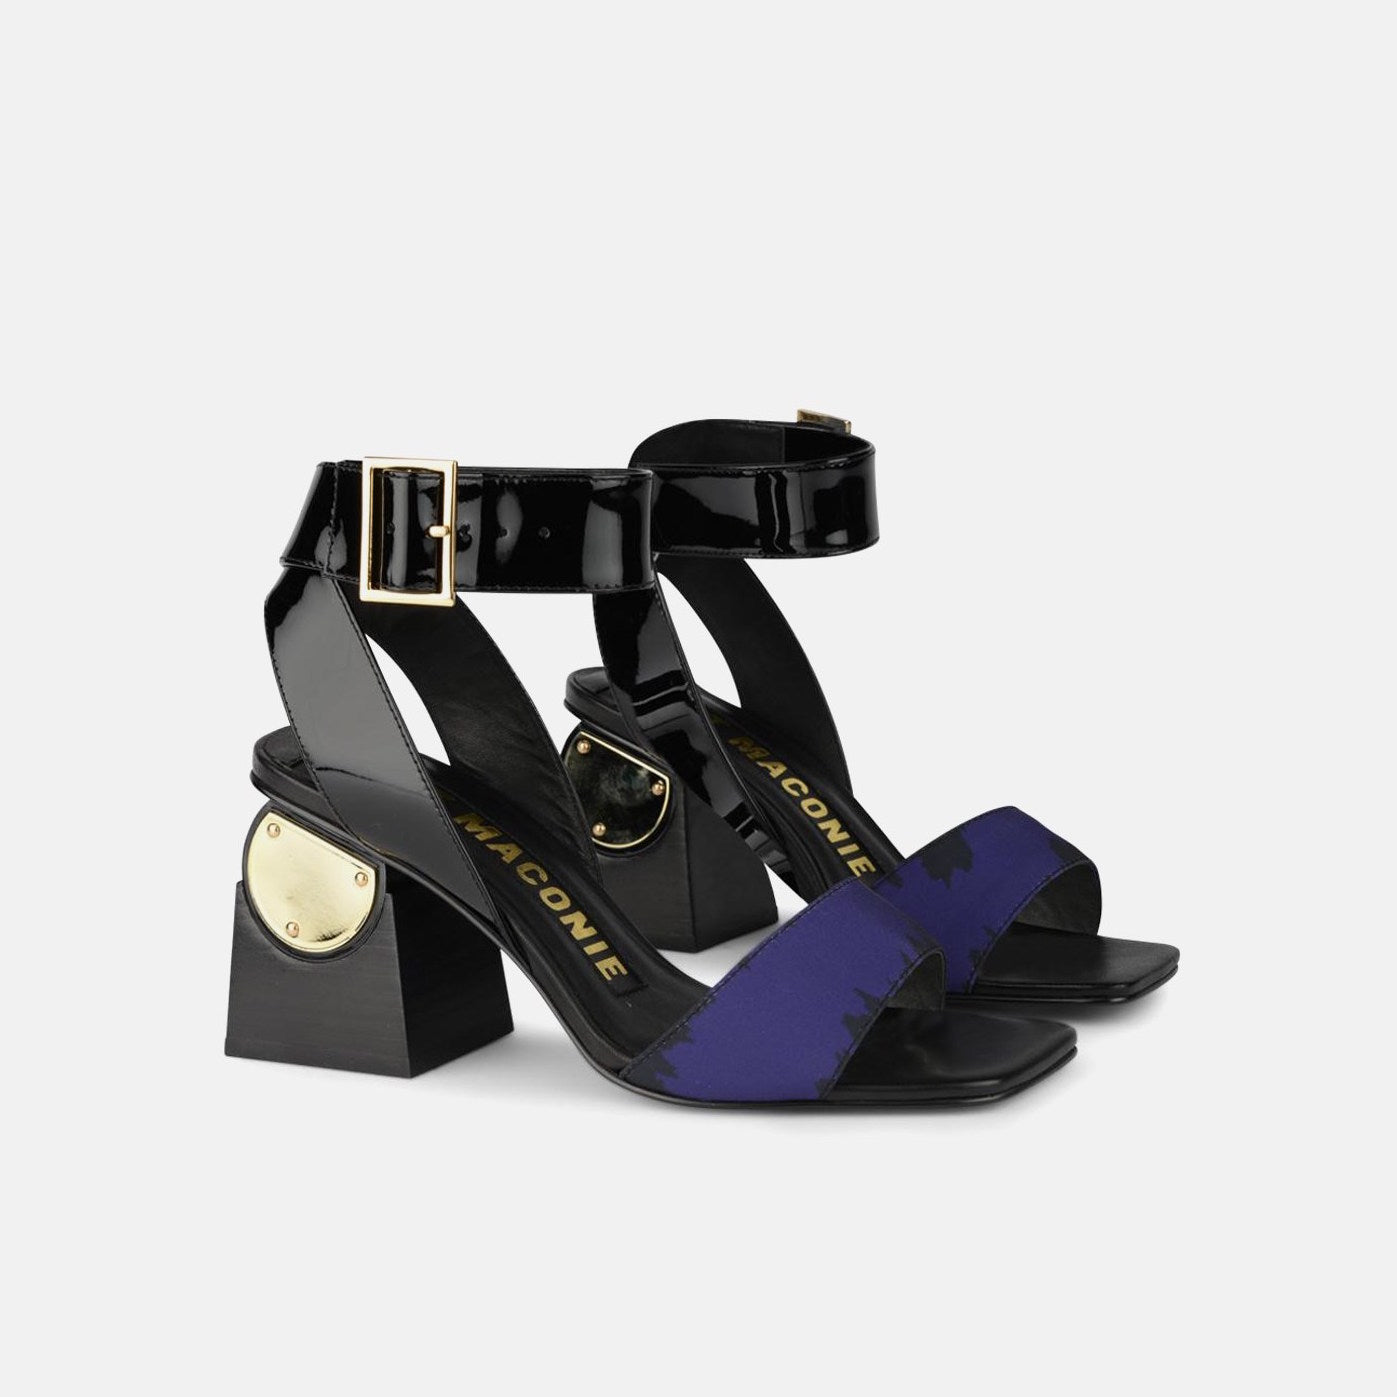 Outer and inner side view of a pair of the kat maconie nyla sandal. This sandal has a black patent leather upper near the heel and a black patent leather ankle strap with a buckle. The upper near the square toe is blue and varnished. The heel is black with a gold circle.